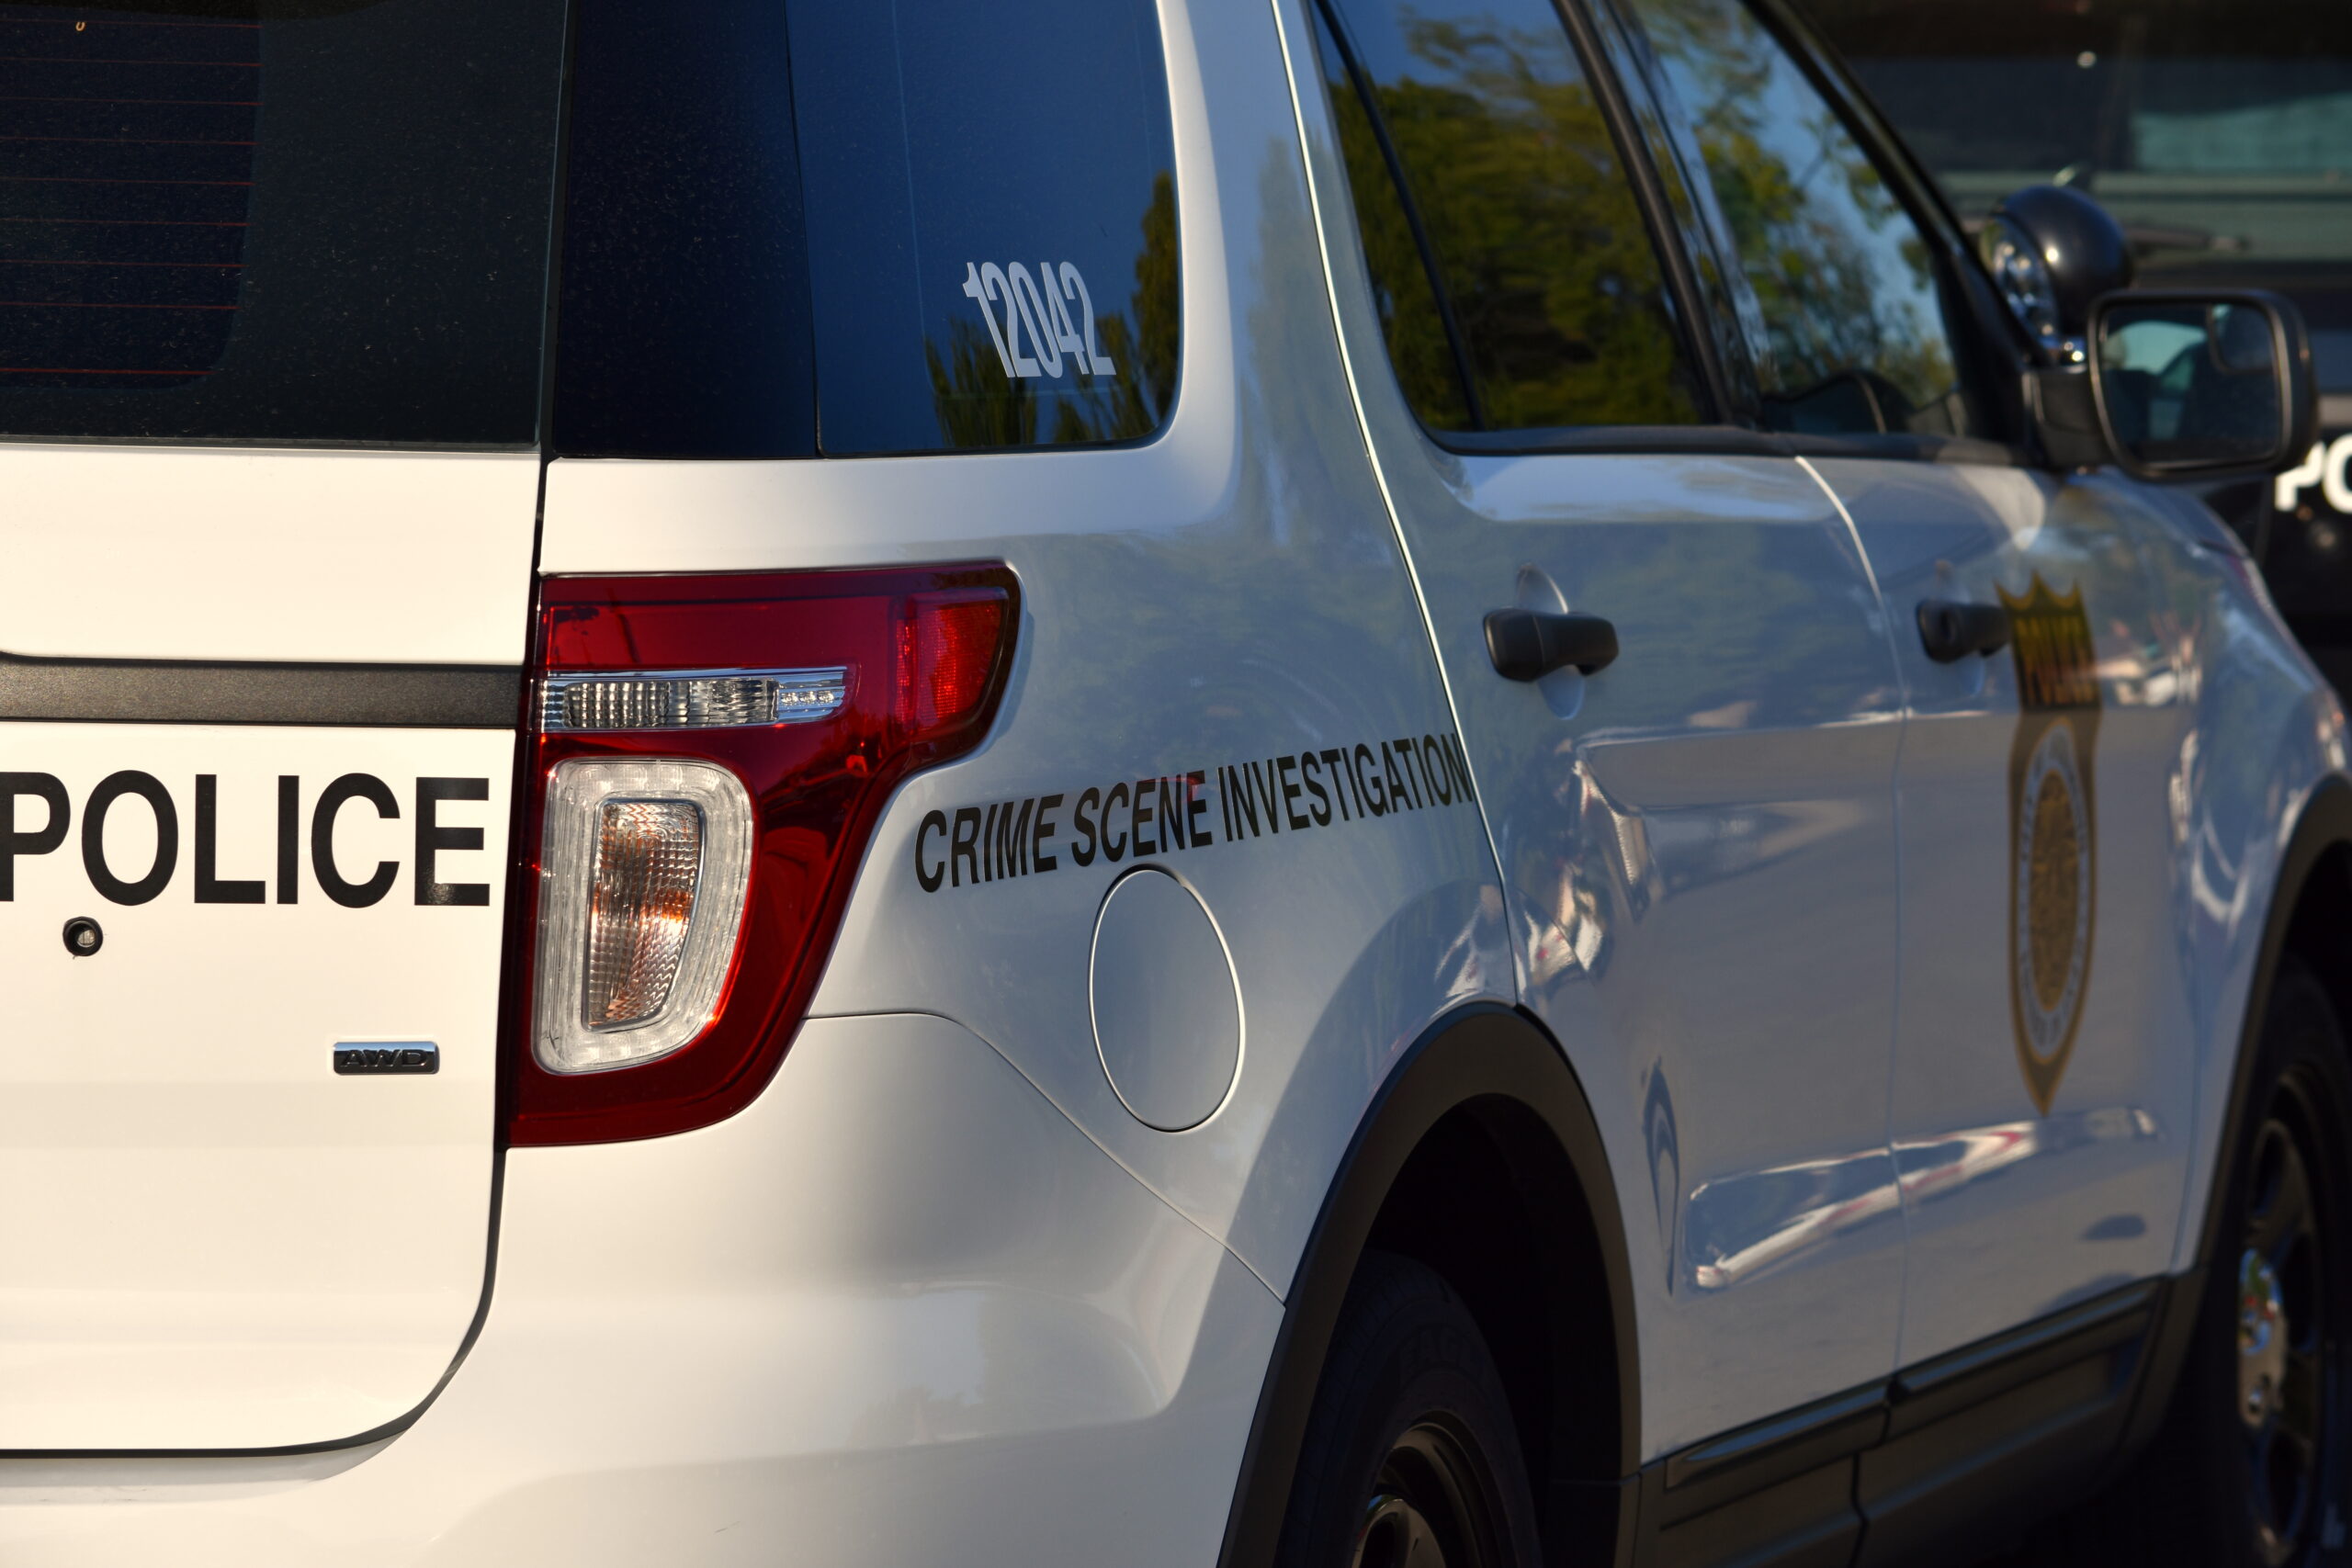 Two Bodies Found Inside Home, Detectives Investigating